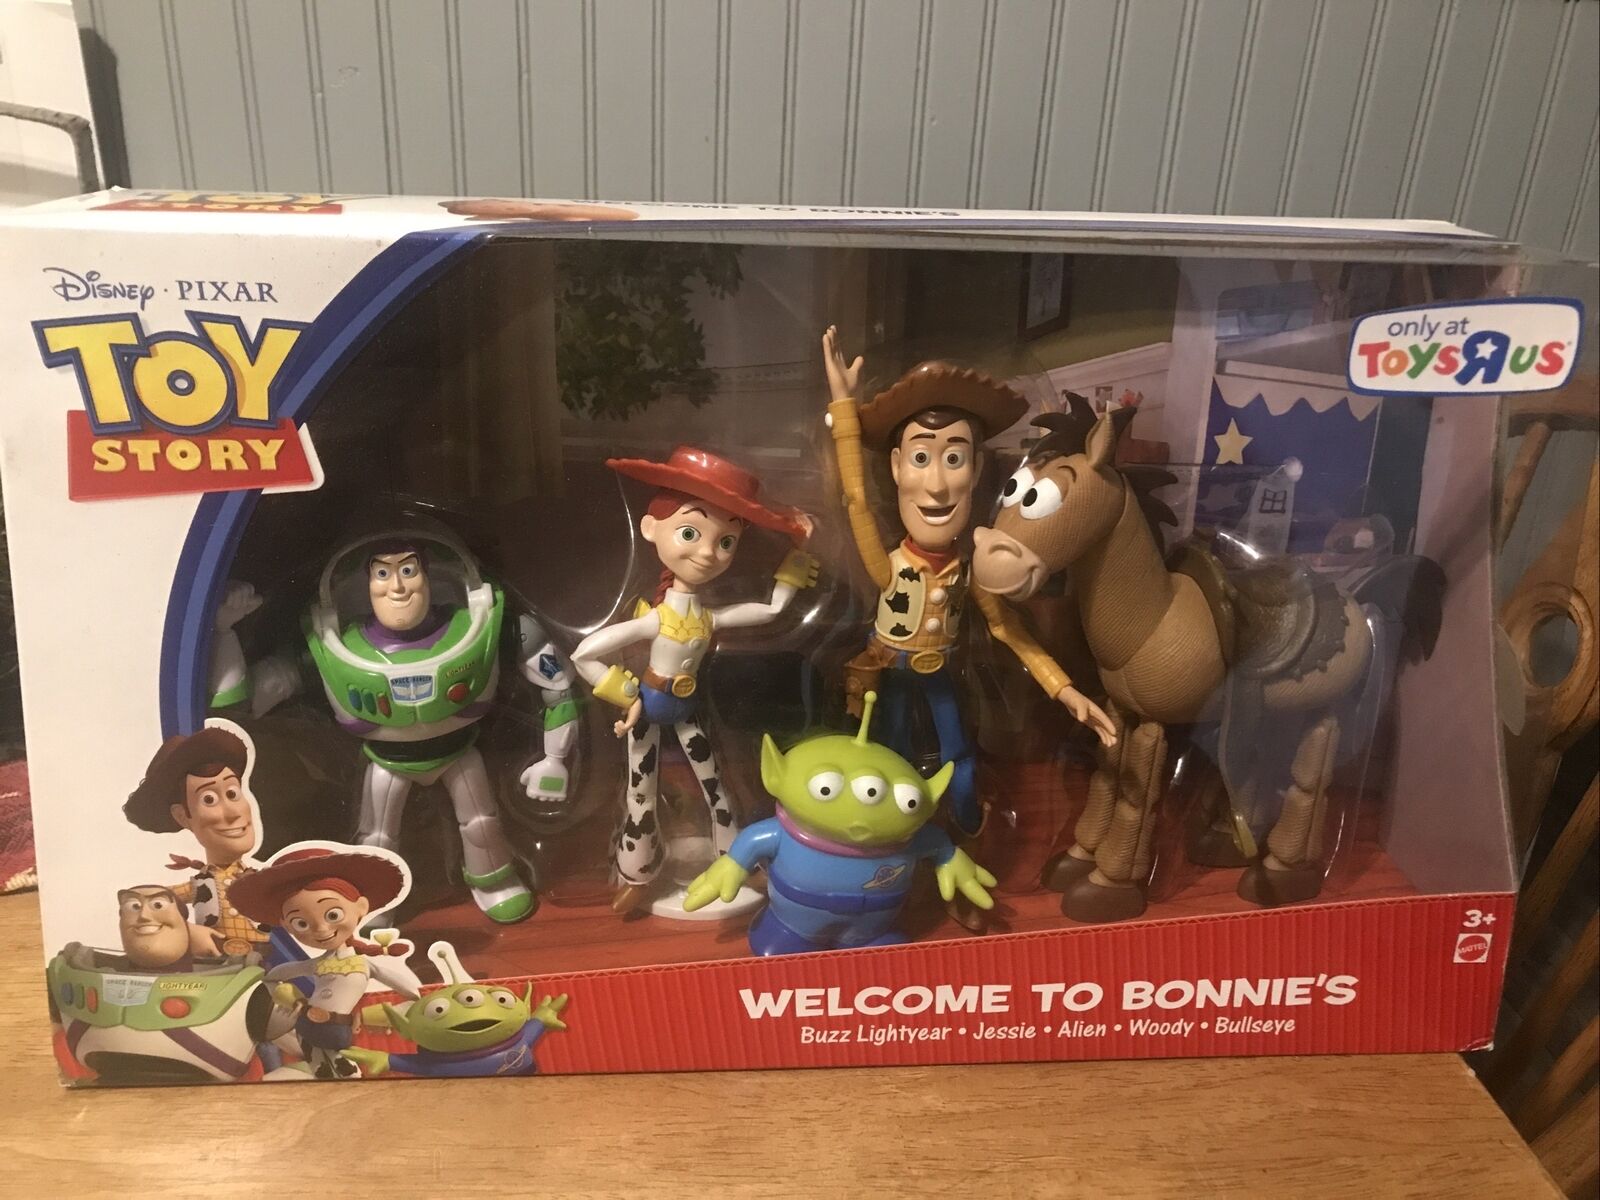 Toy Story Welcome To Sunnyside 7-Action Figure Set Toys R Us Exclusive New